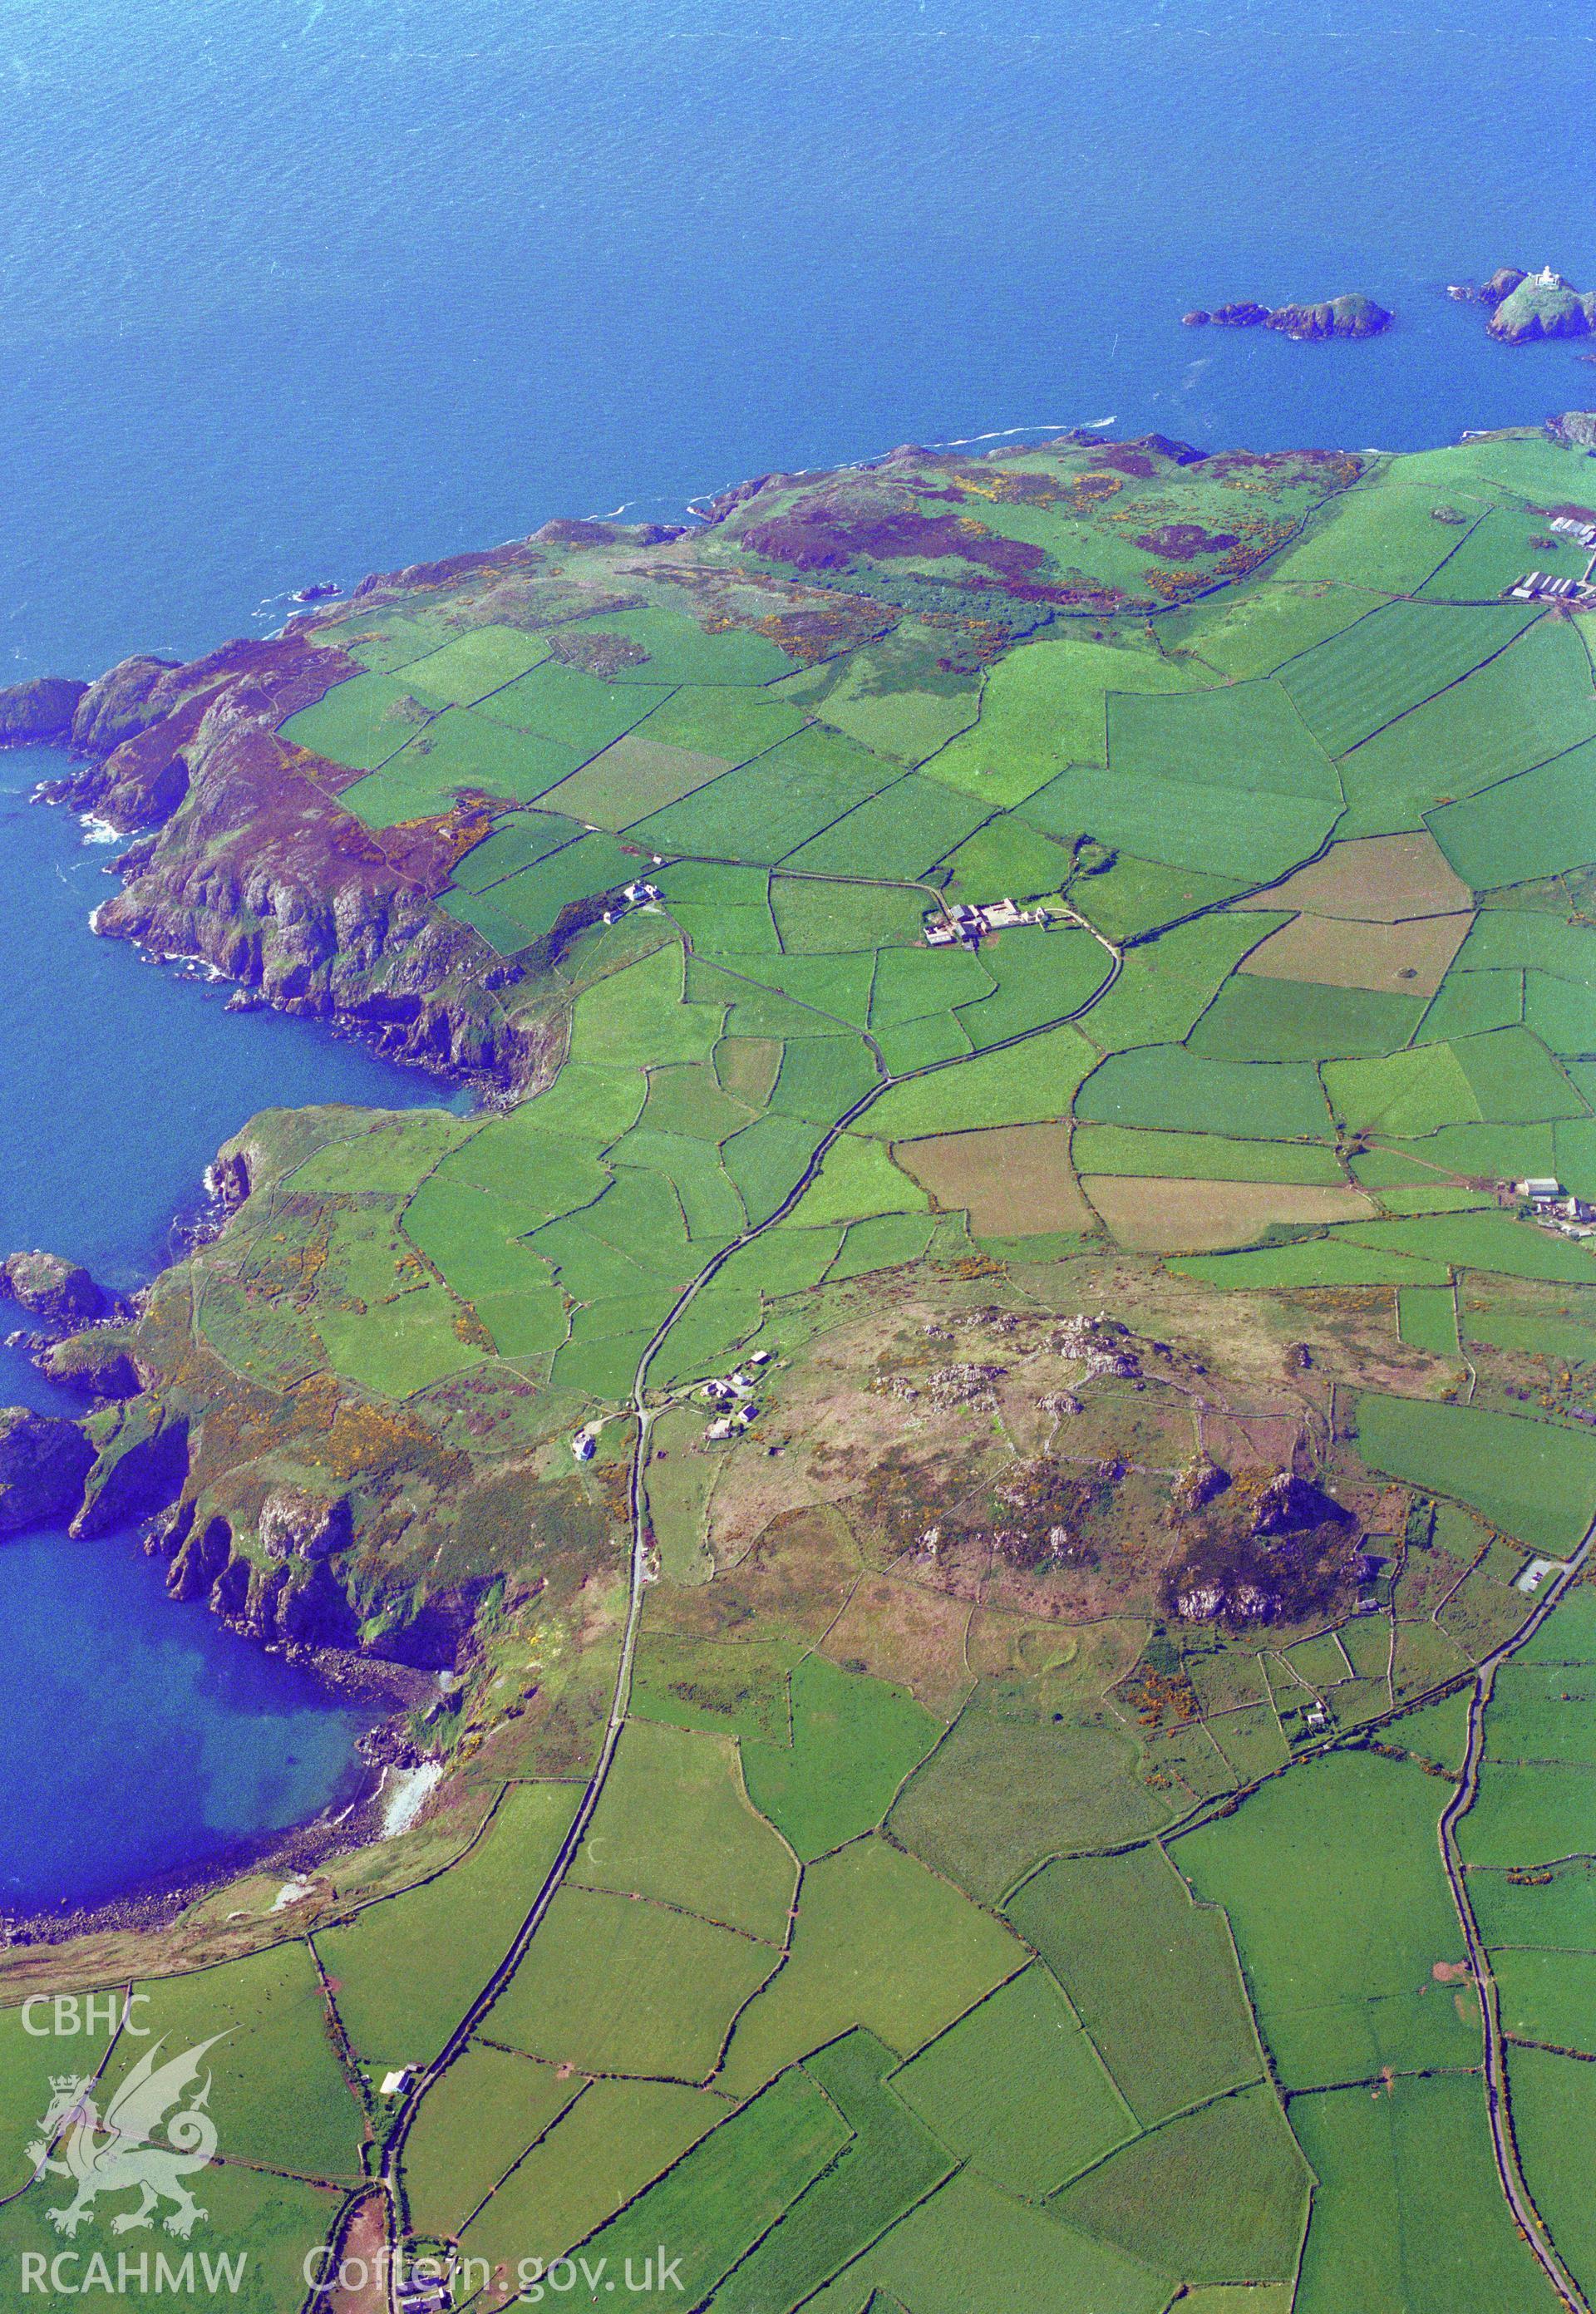 RCAHMW colour oblique aerial photograph of Garn Fawr, Pencaer taken by Toby Driver 2000